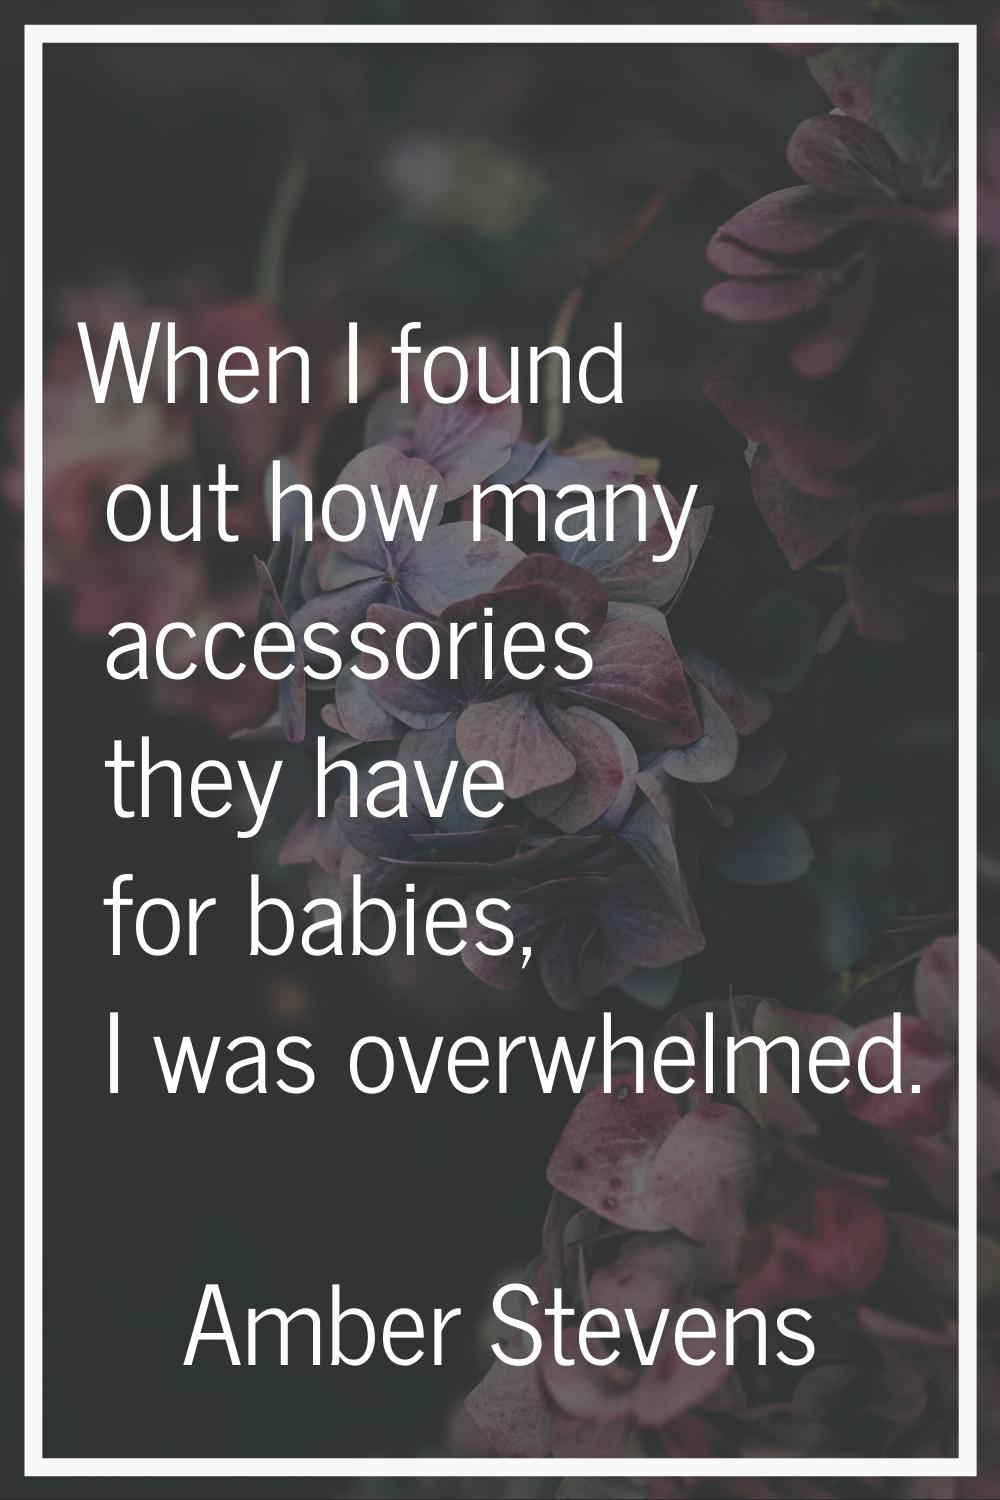 When I found out how many accessories they have for babies, I was overwhelmed.